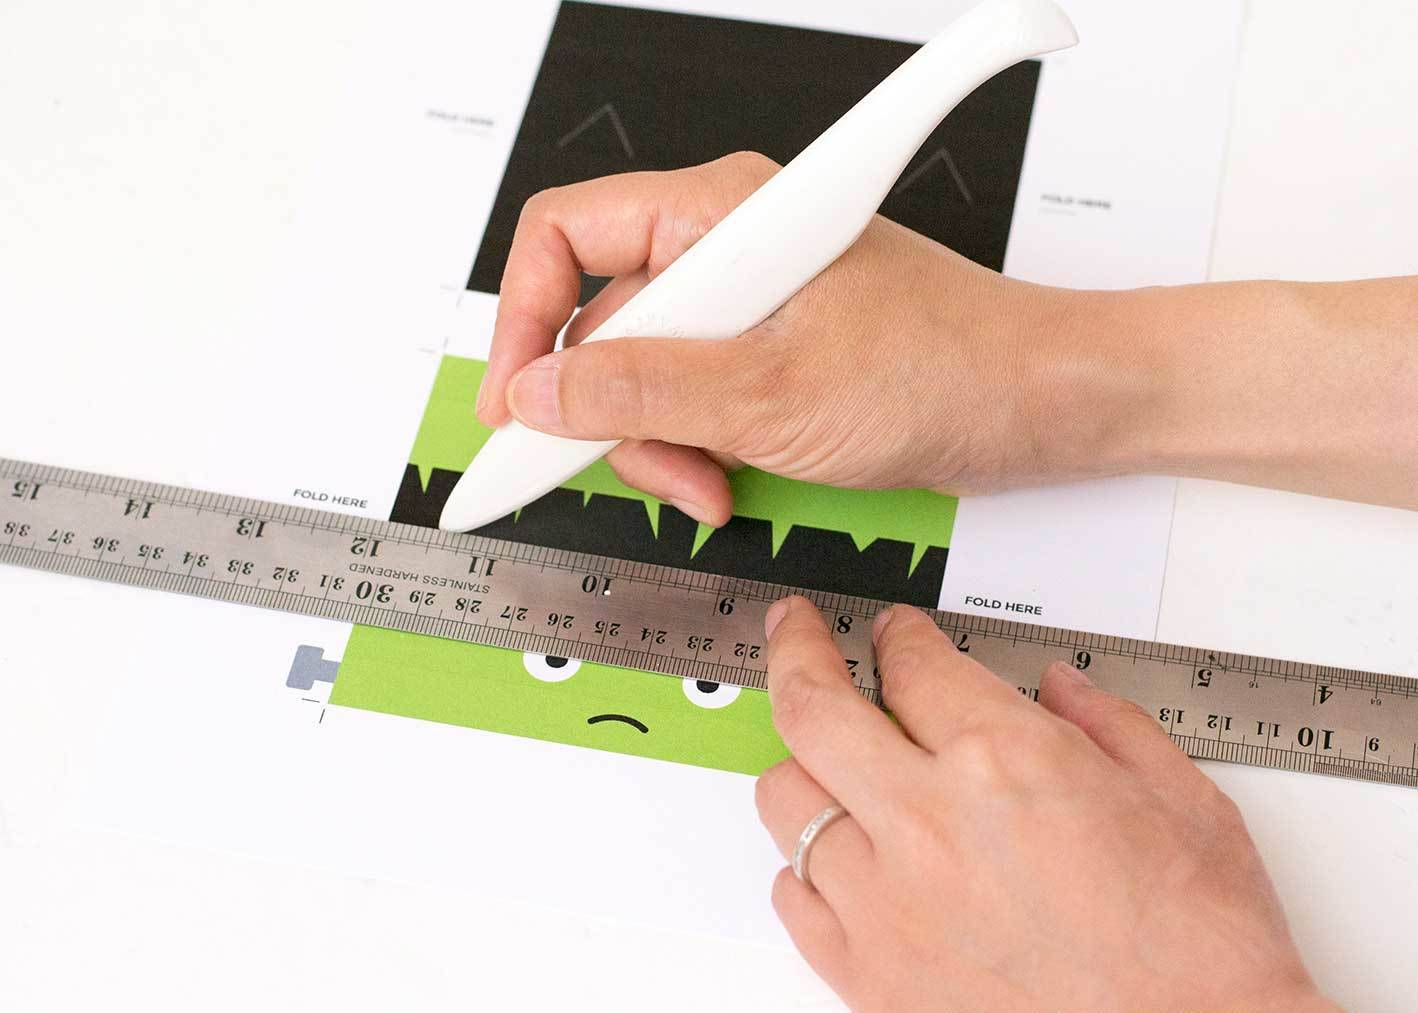 A person cutting a green and black craft project with a white cutter and a silver ruler.